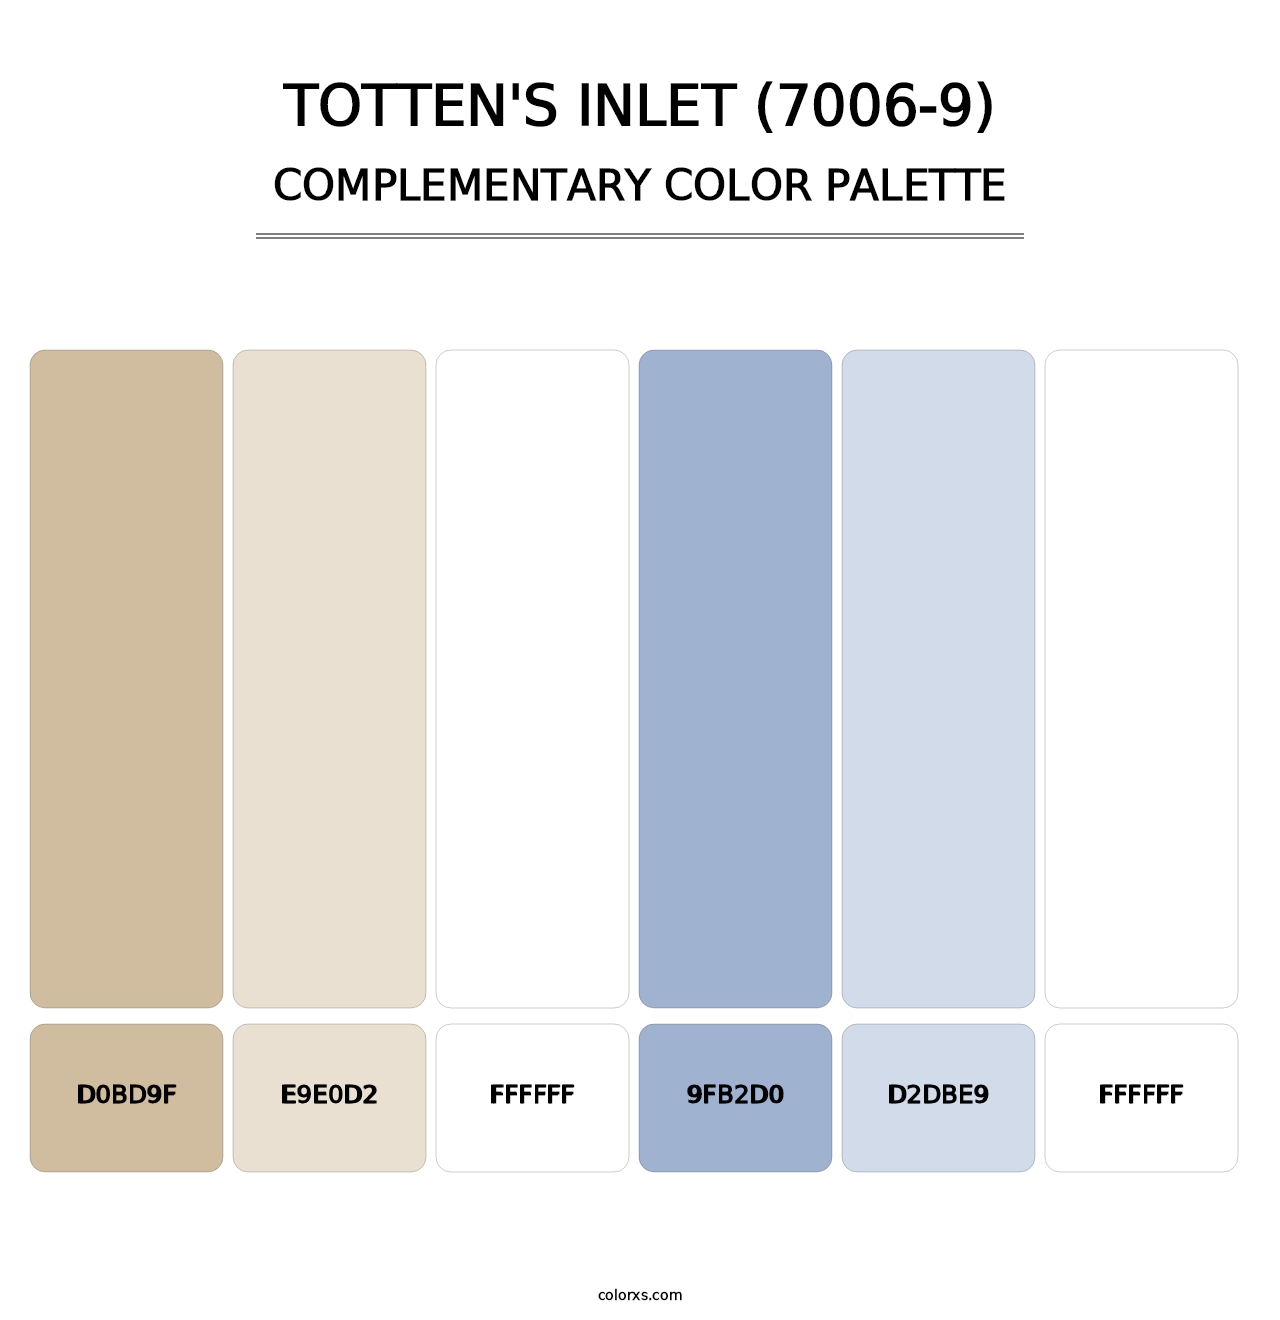 Totten's Inlet (7006-9) - Complementary Color Palette